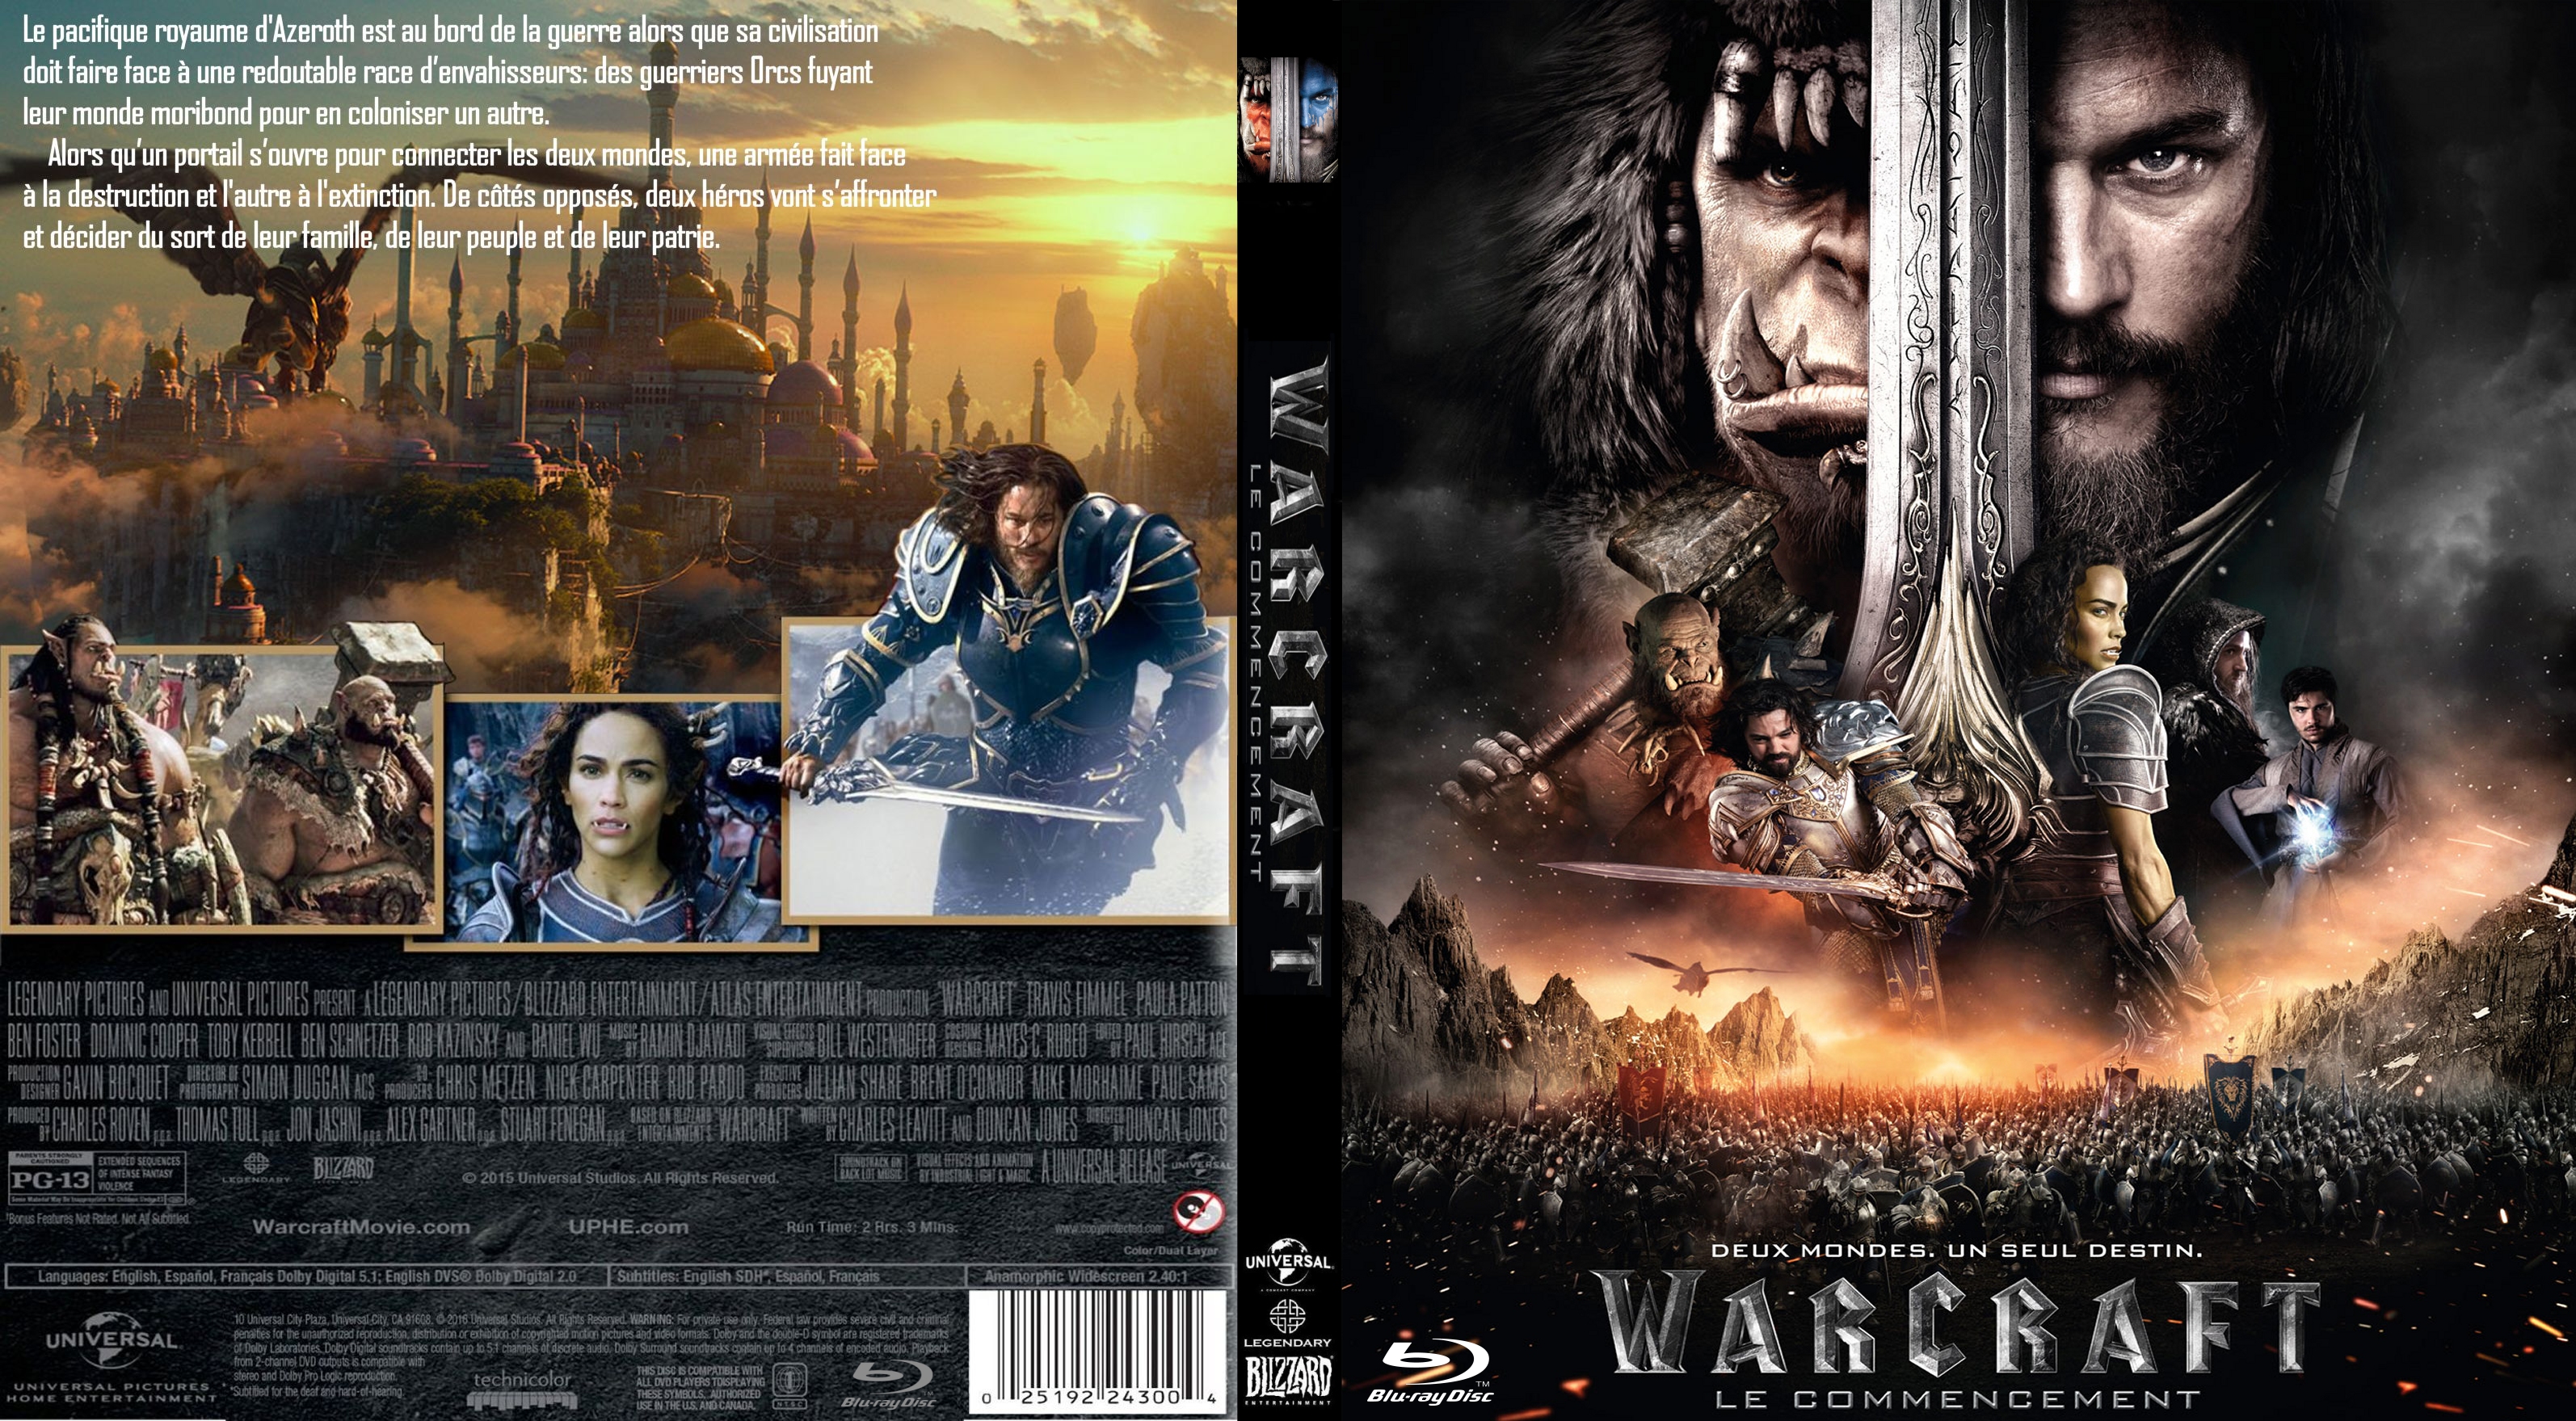 Jaquette DVD Warcraft : Le commencement custom (BLU-RAY)